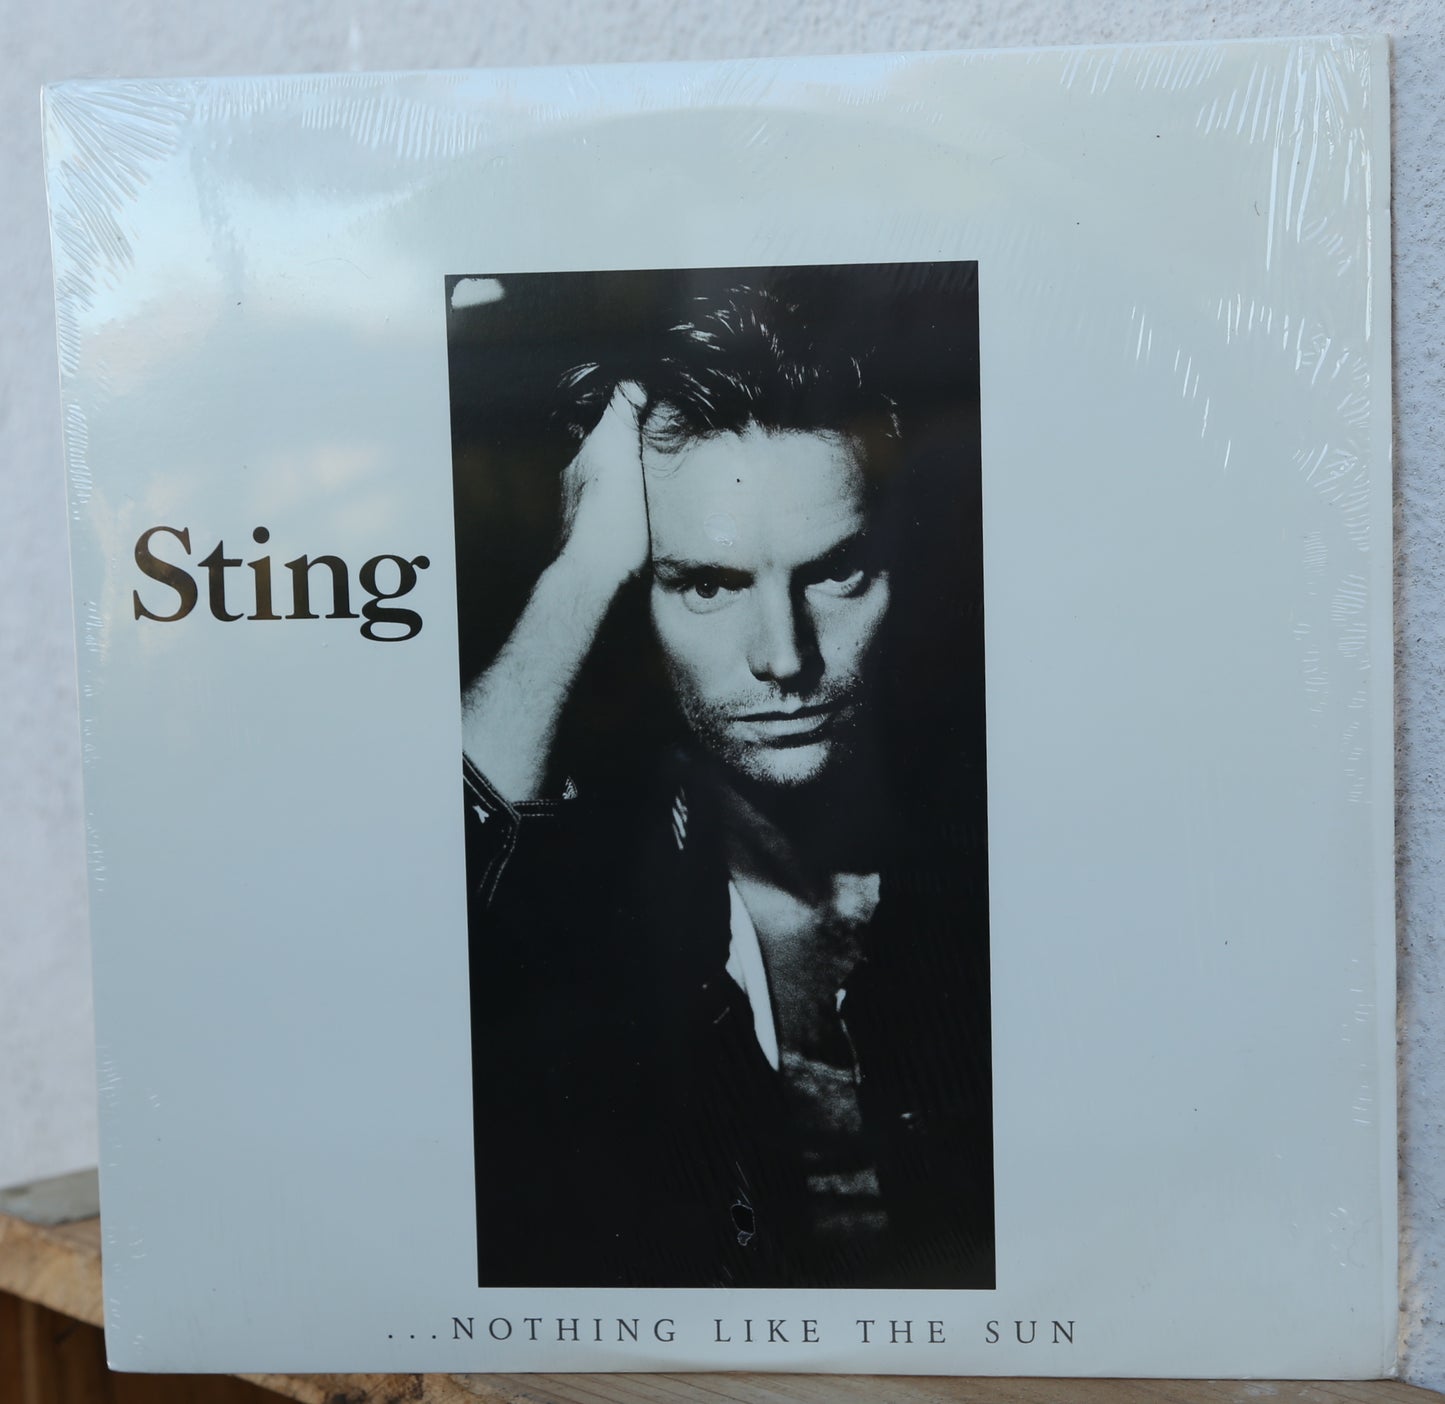 Sting - Nothing like the sun